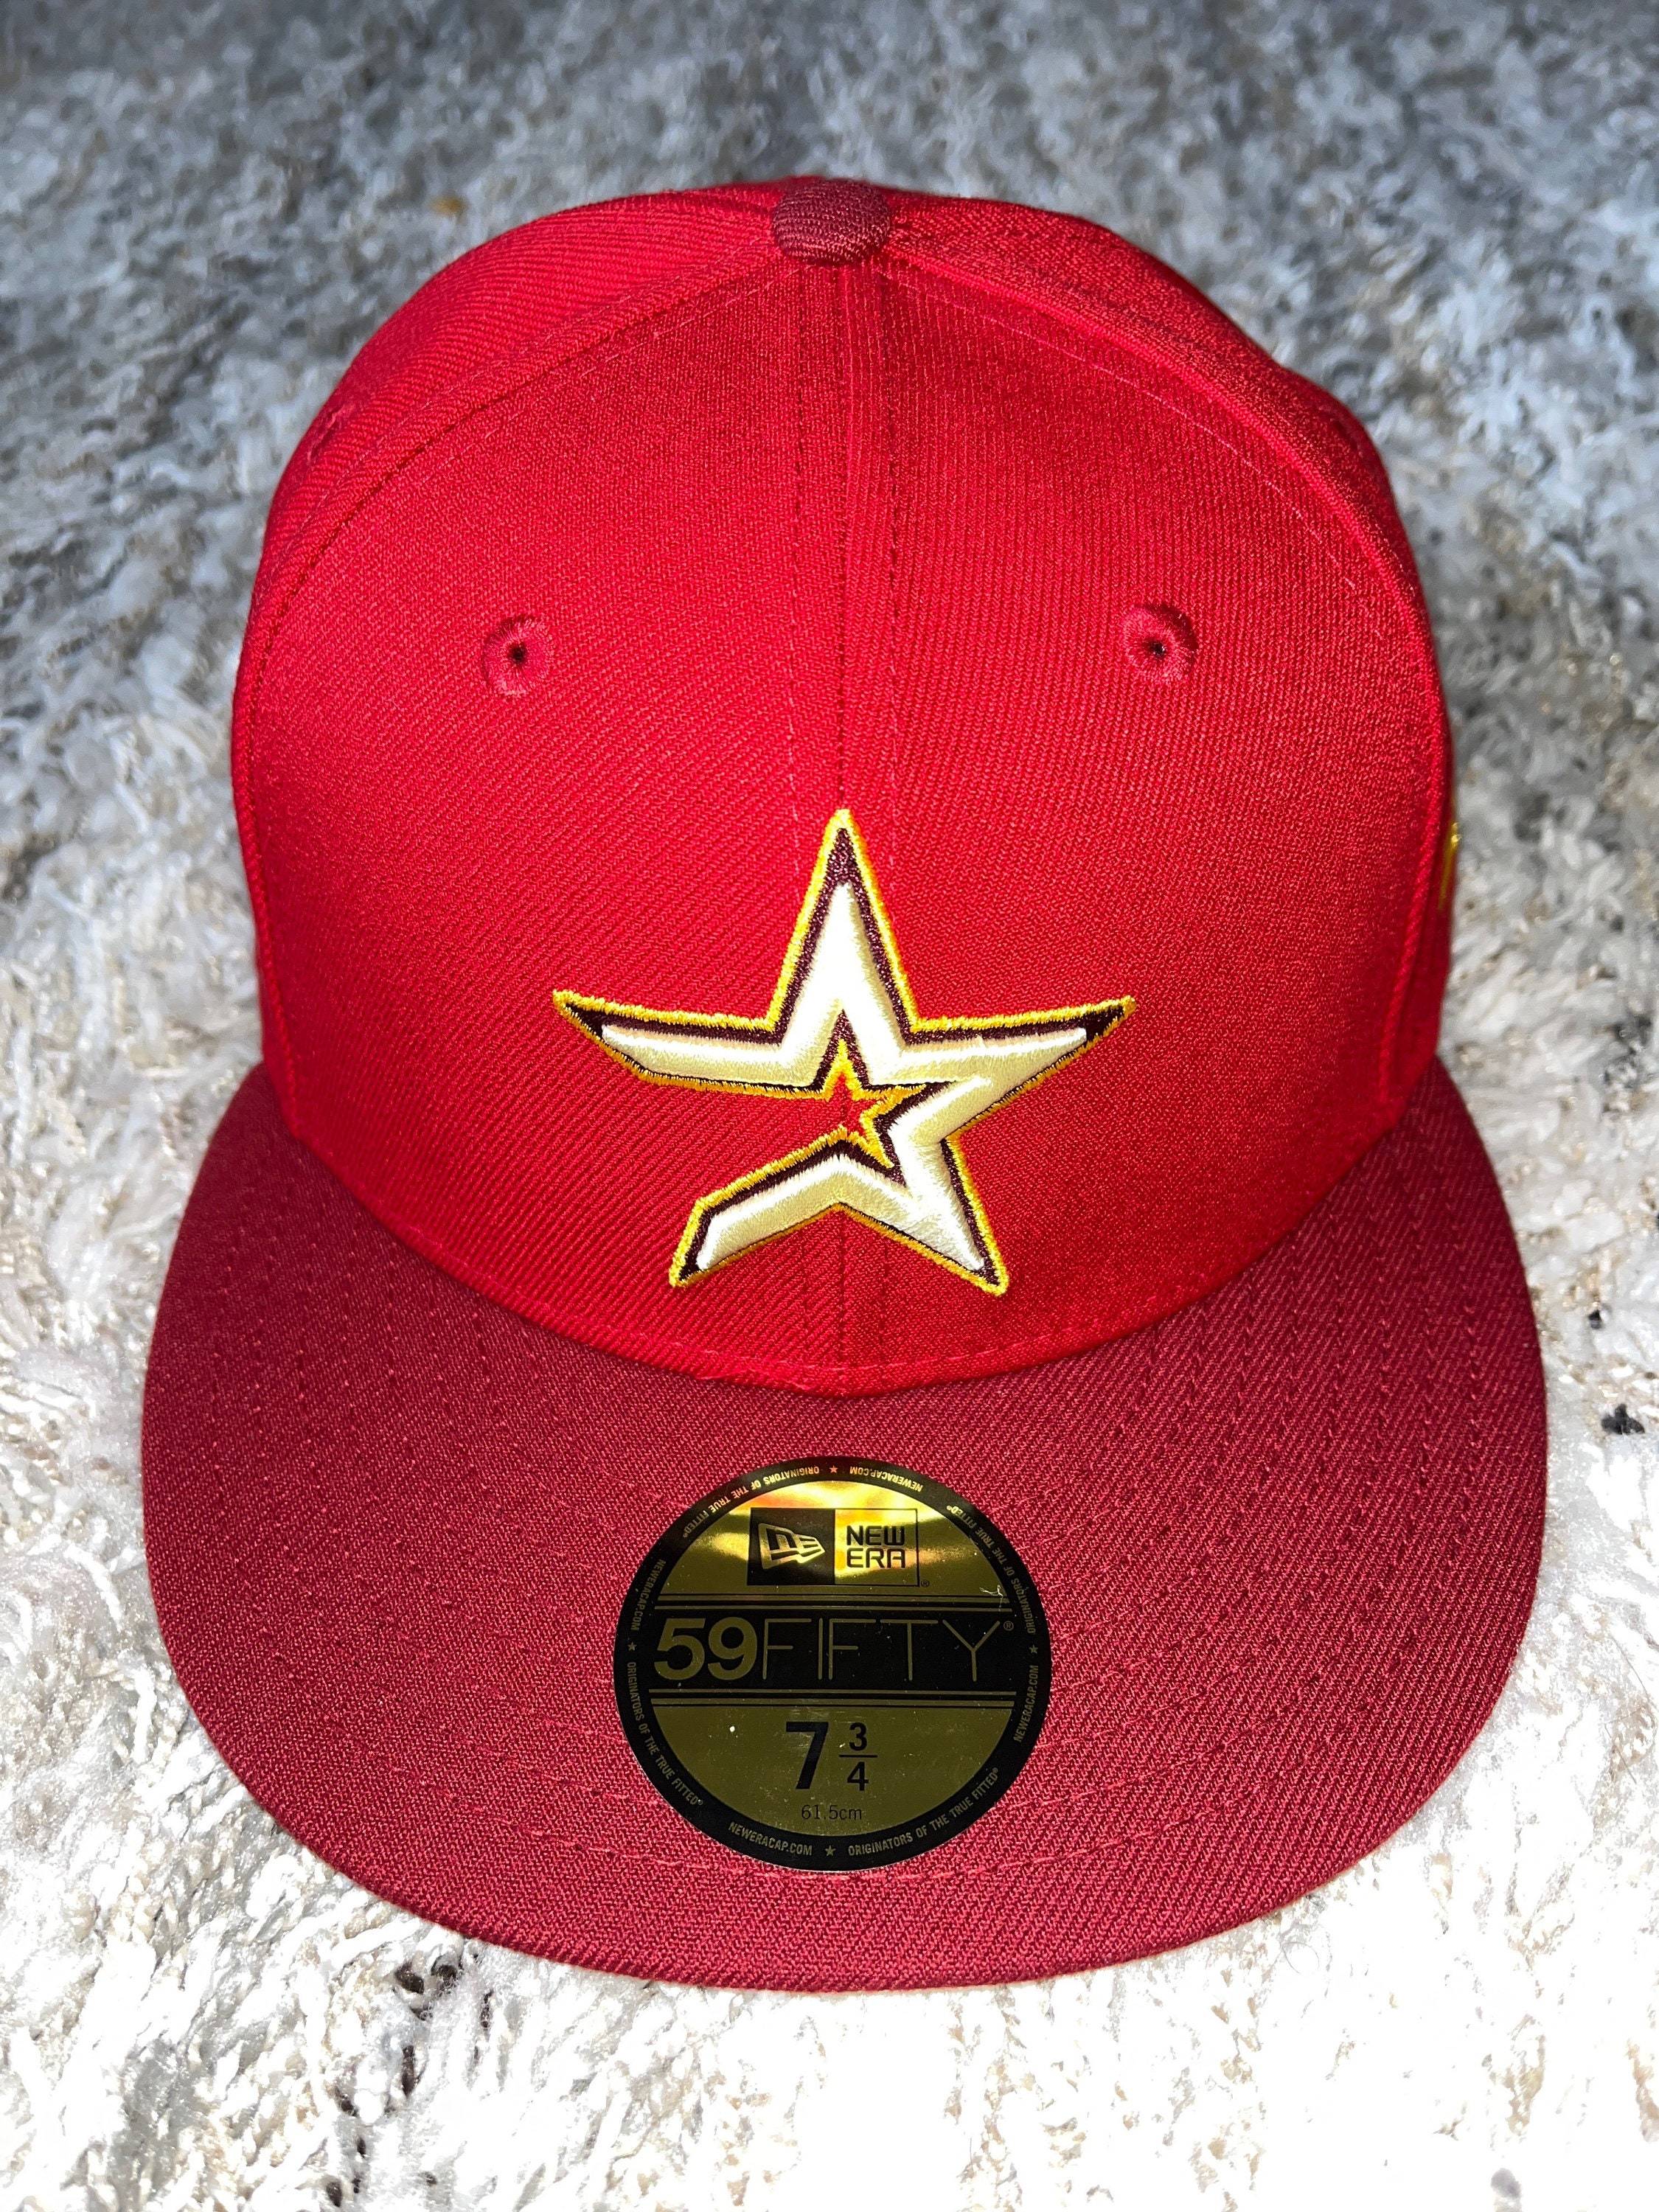 MLB Houston Astros W/Series 2017 New Era 59FIFTY Fitted Baseball